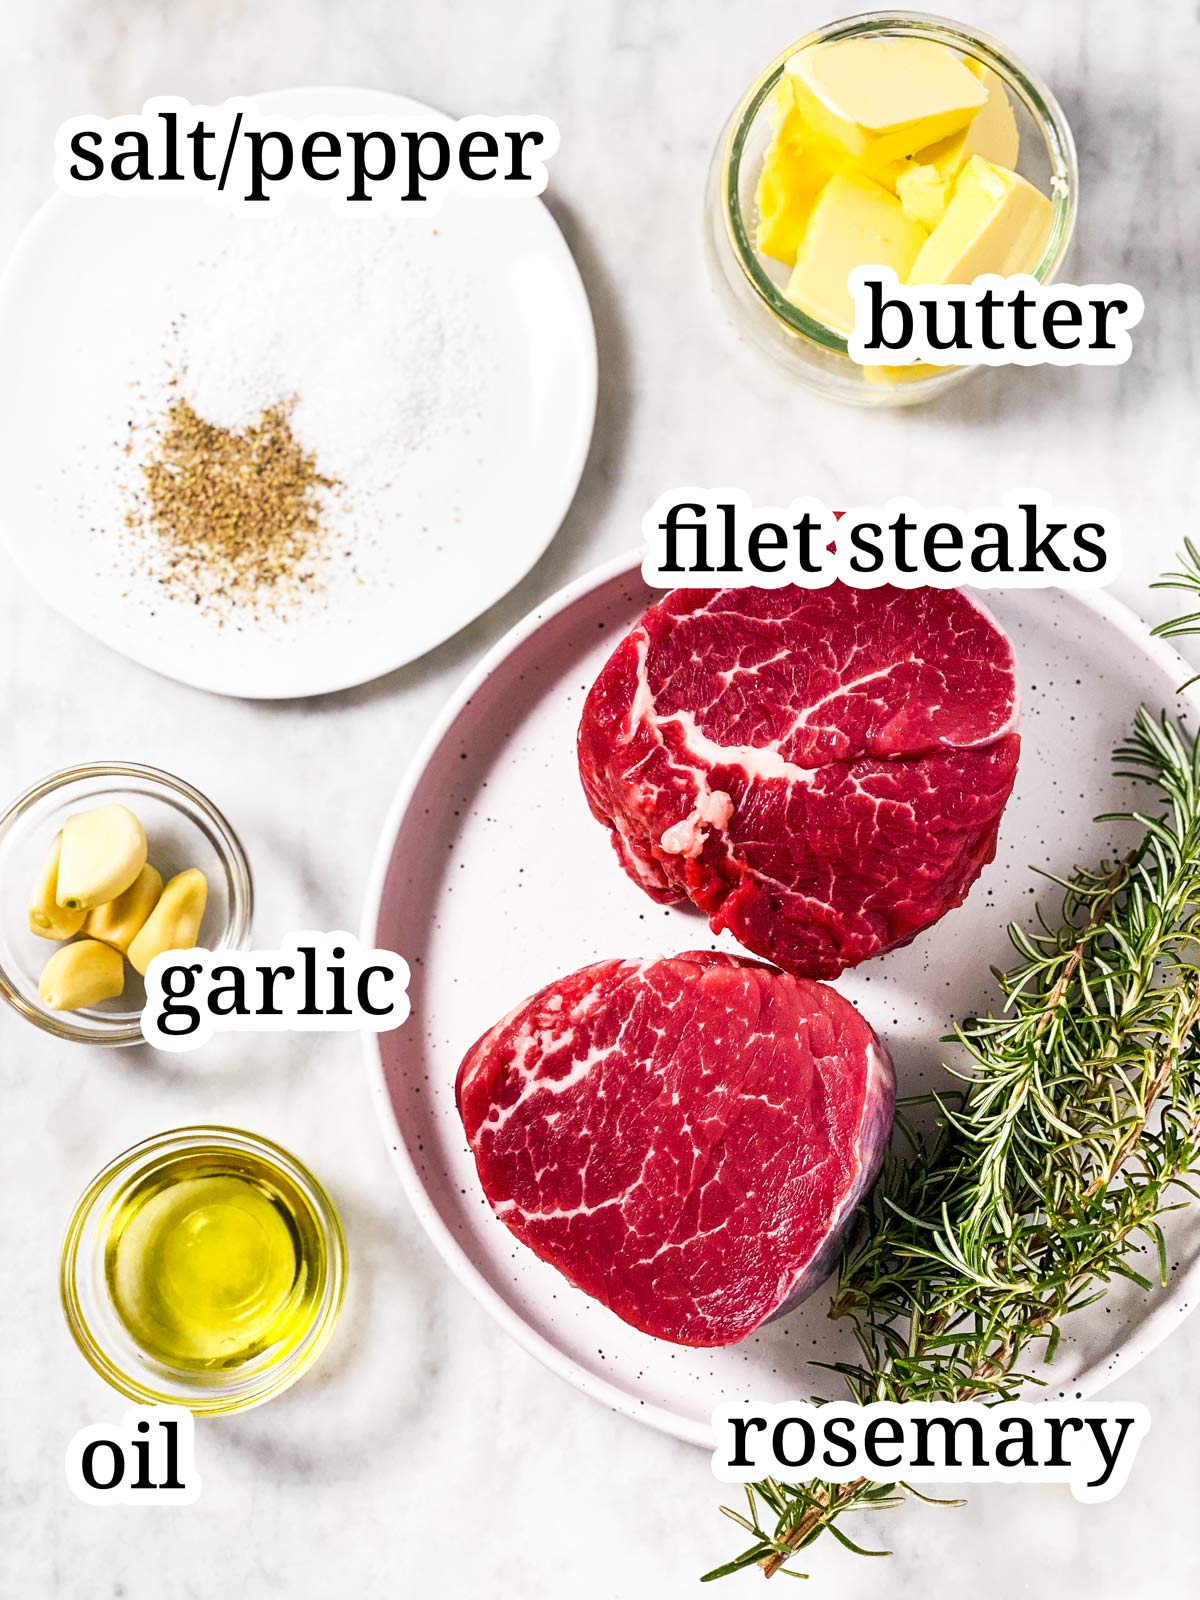 ingredients for filet mignon with text labels